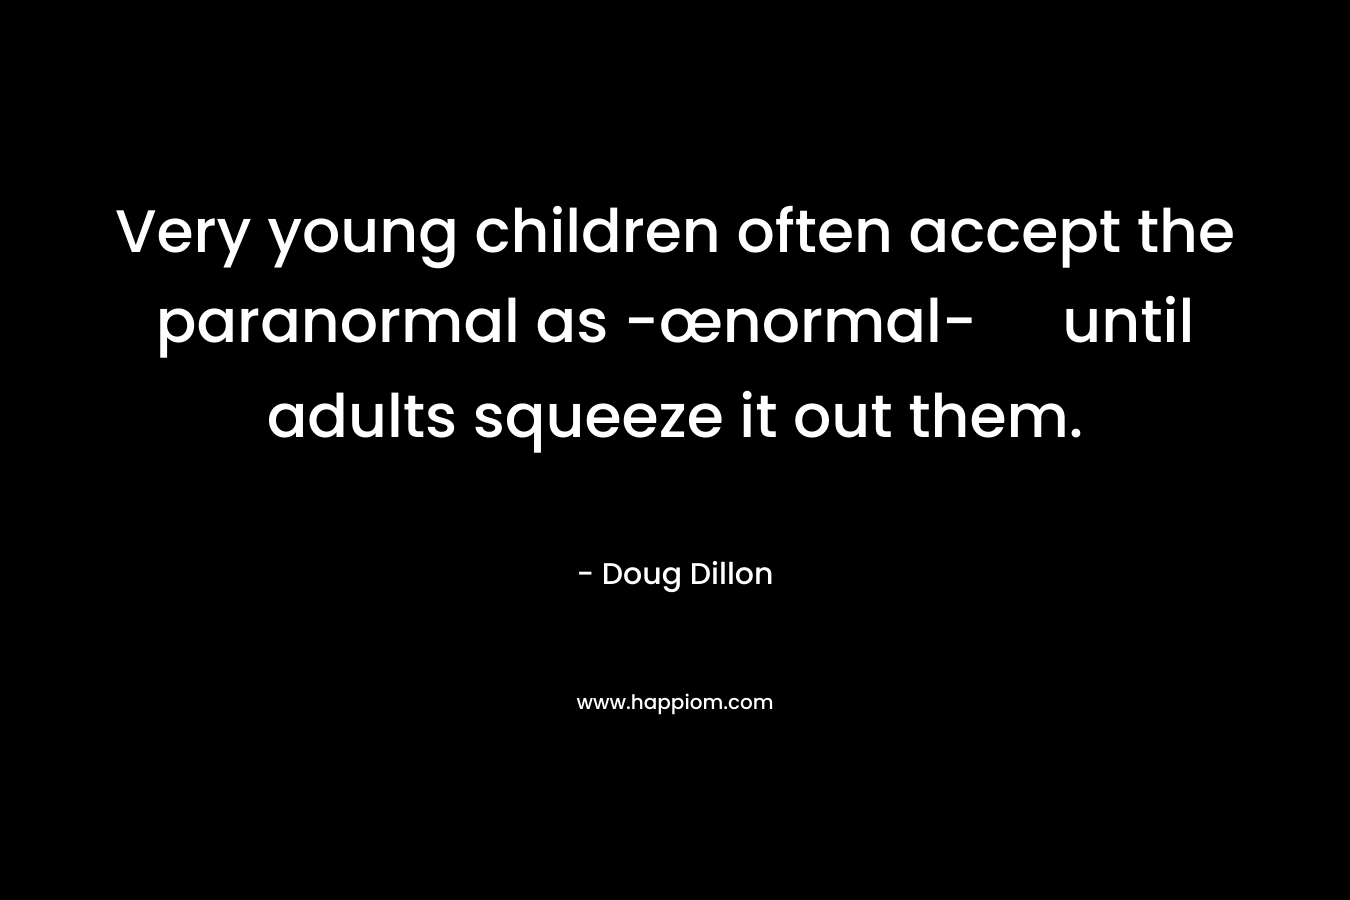 Very young children often accept the paranormal as -œnormal- until adults squeeze it out them. – Doug Dillon